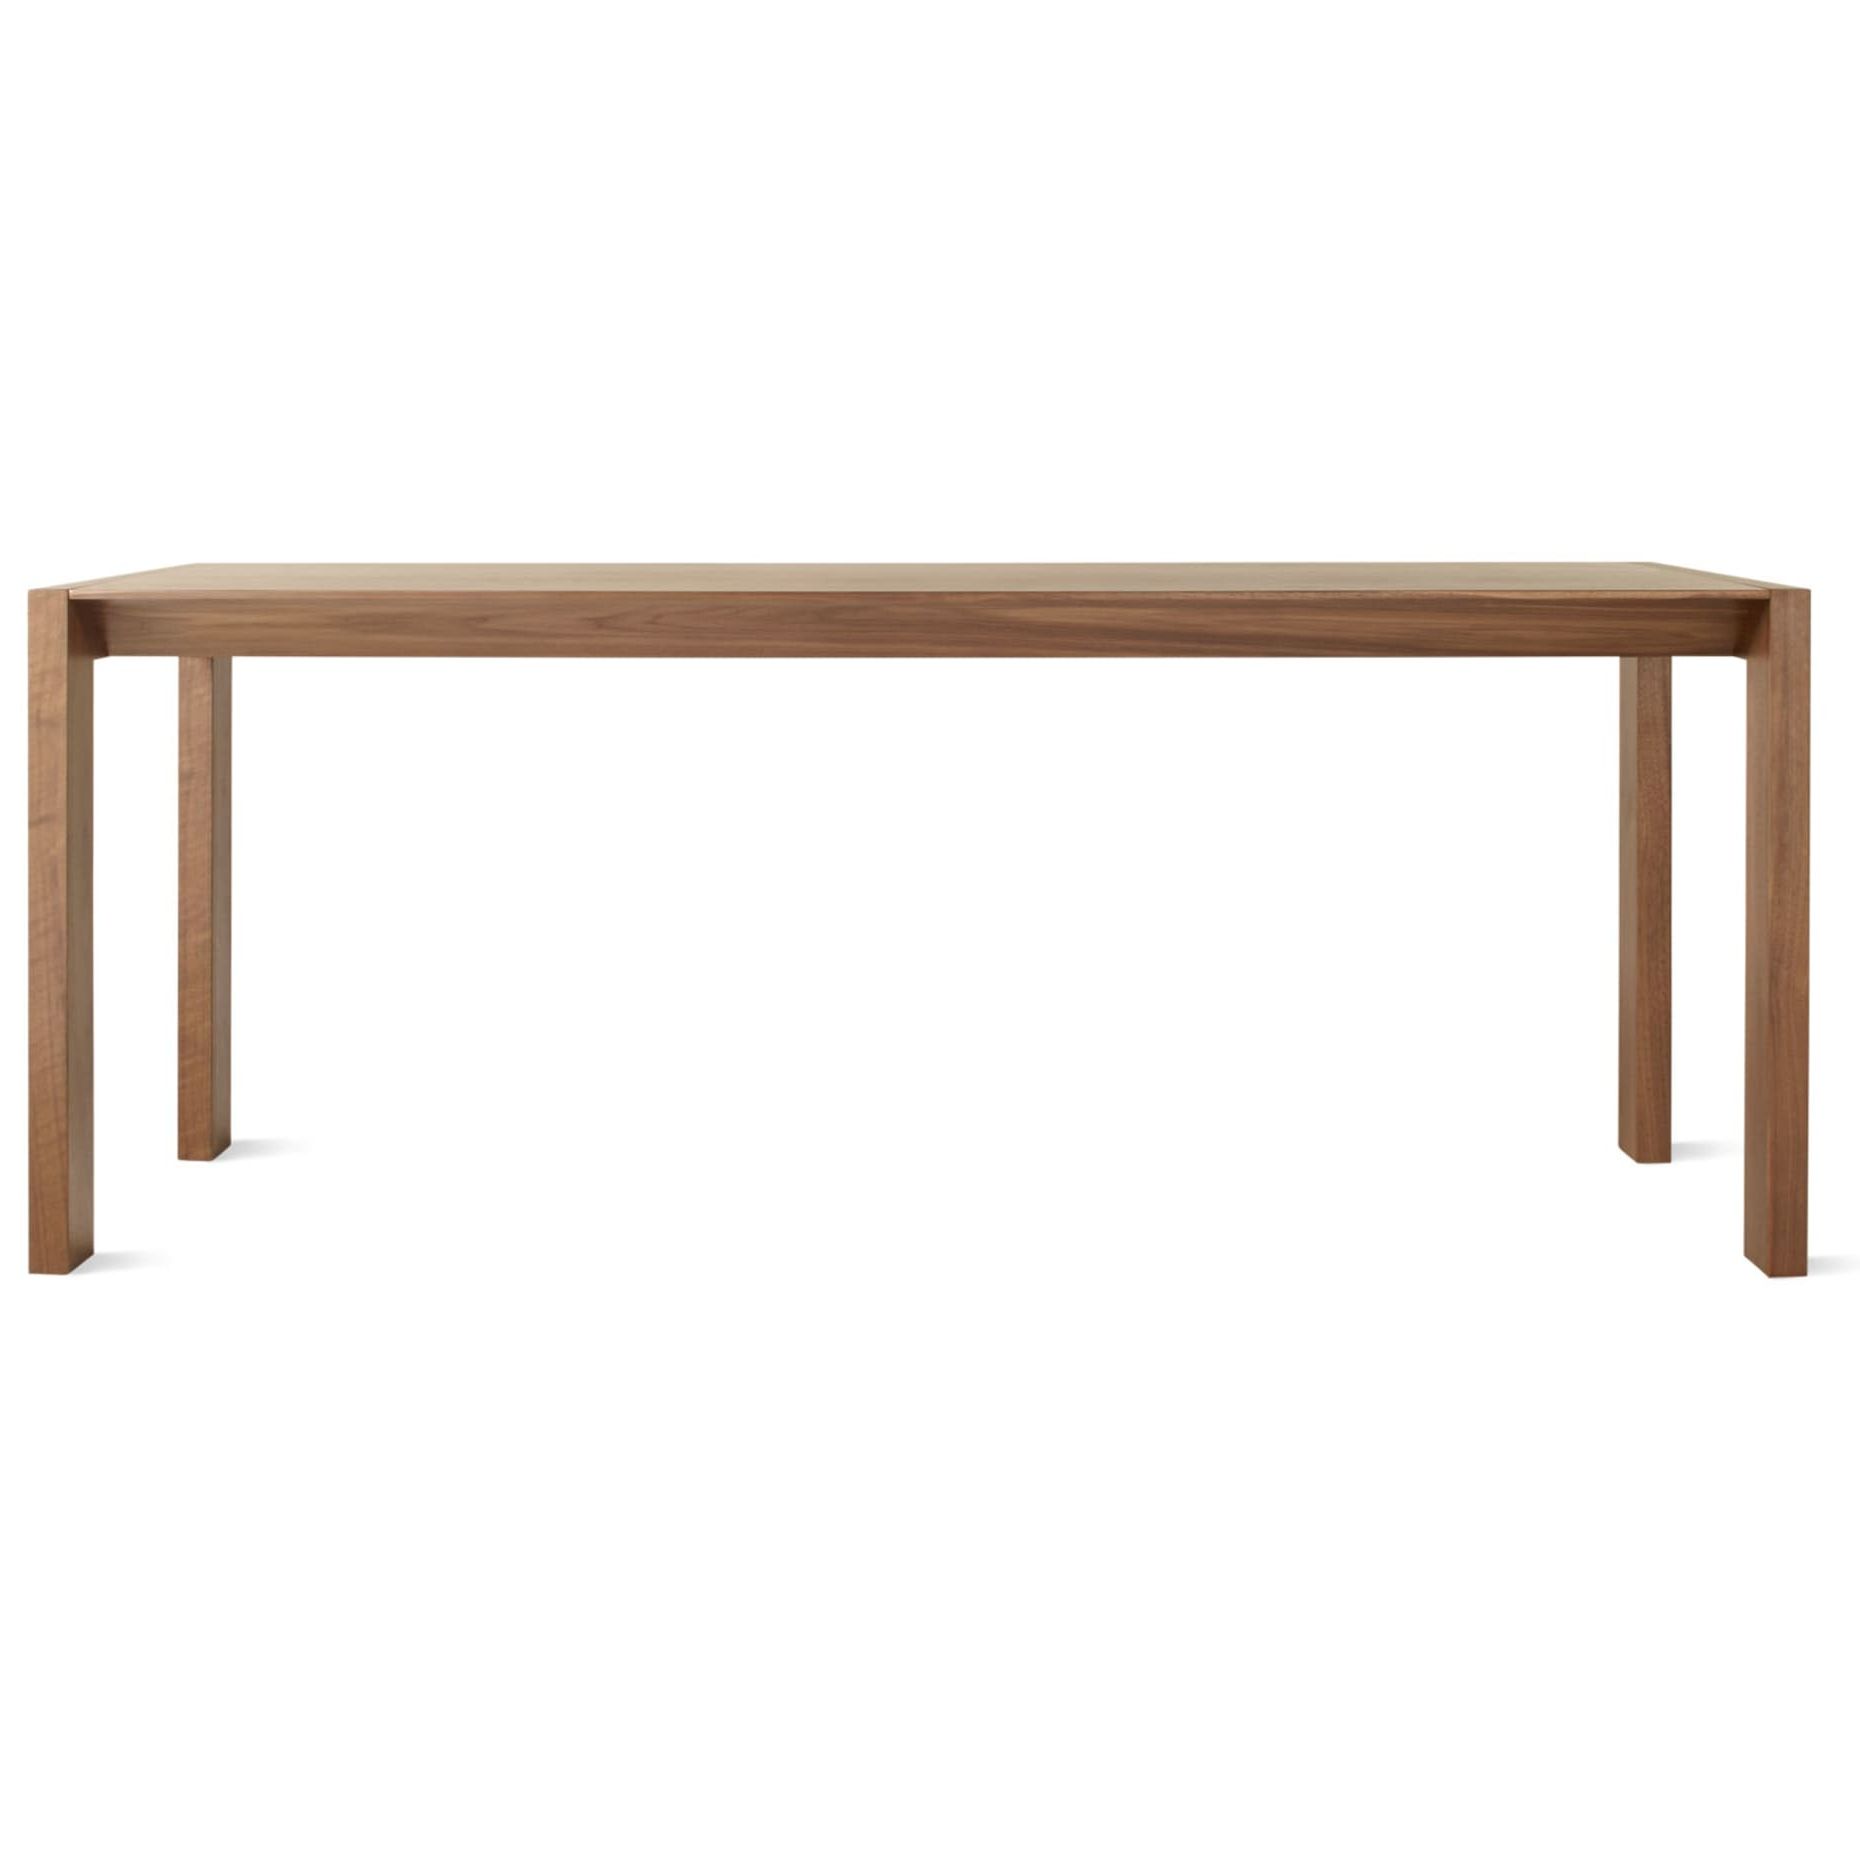 Second Best 76" Wood Dining Table Regarding Most Up To Date Provence Accent Dining Tables (View 7 of 25)